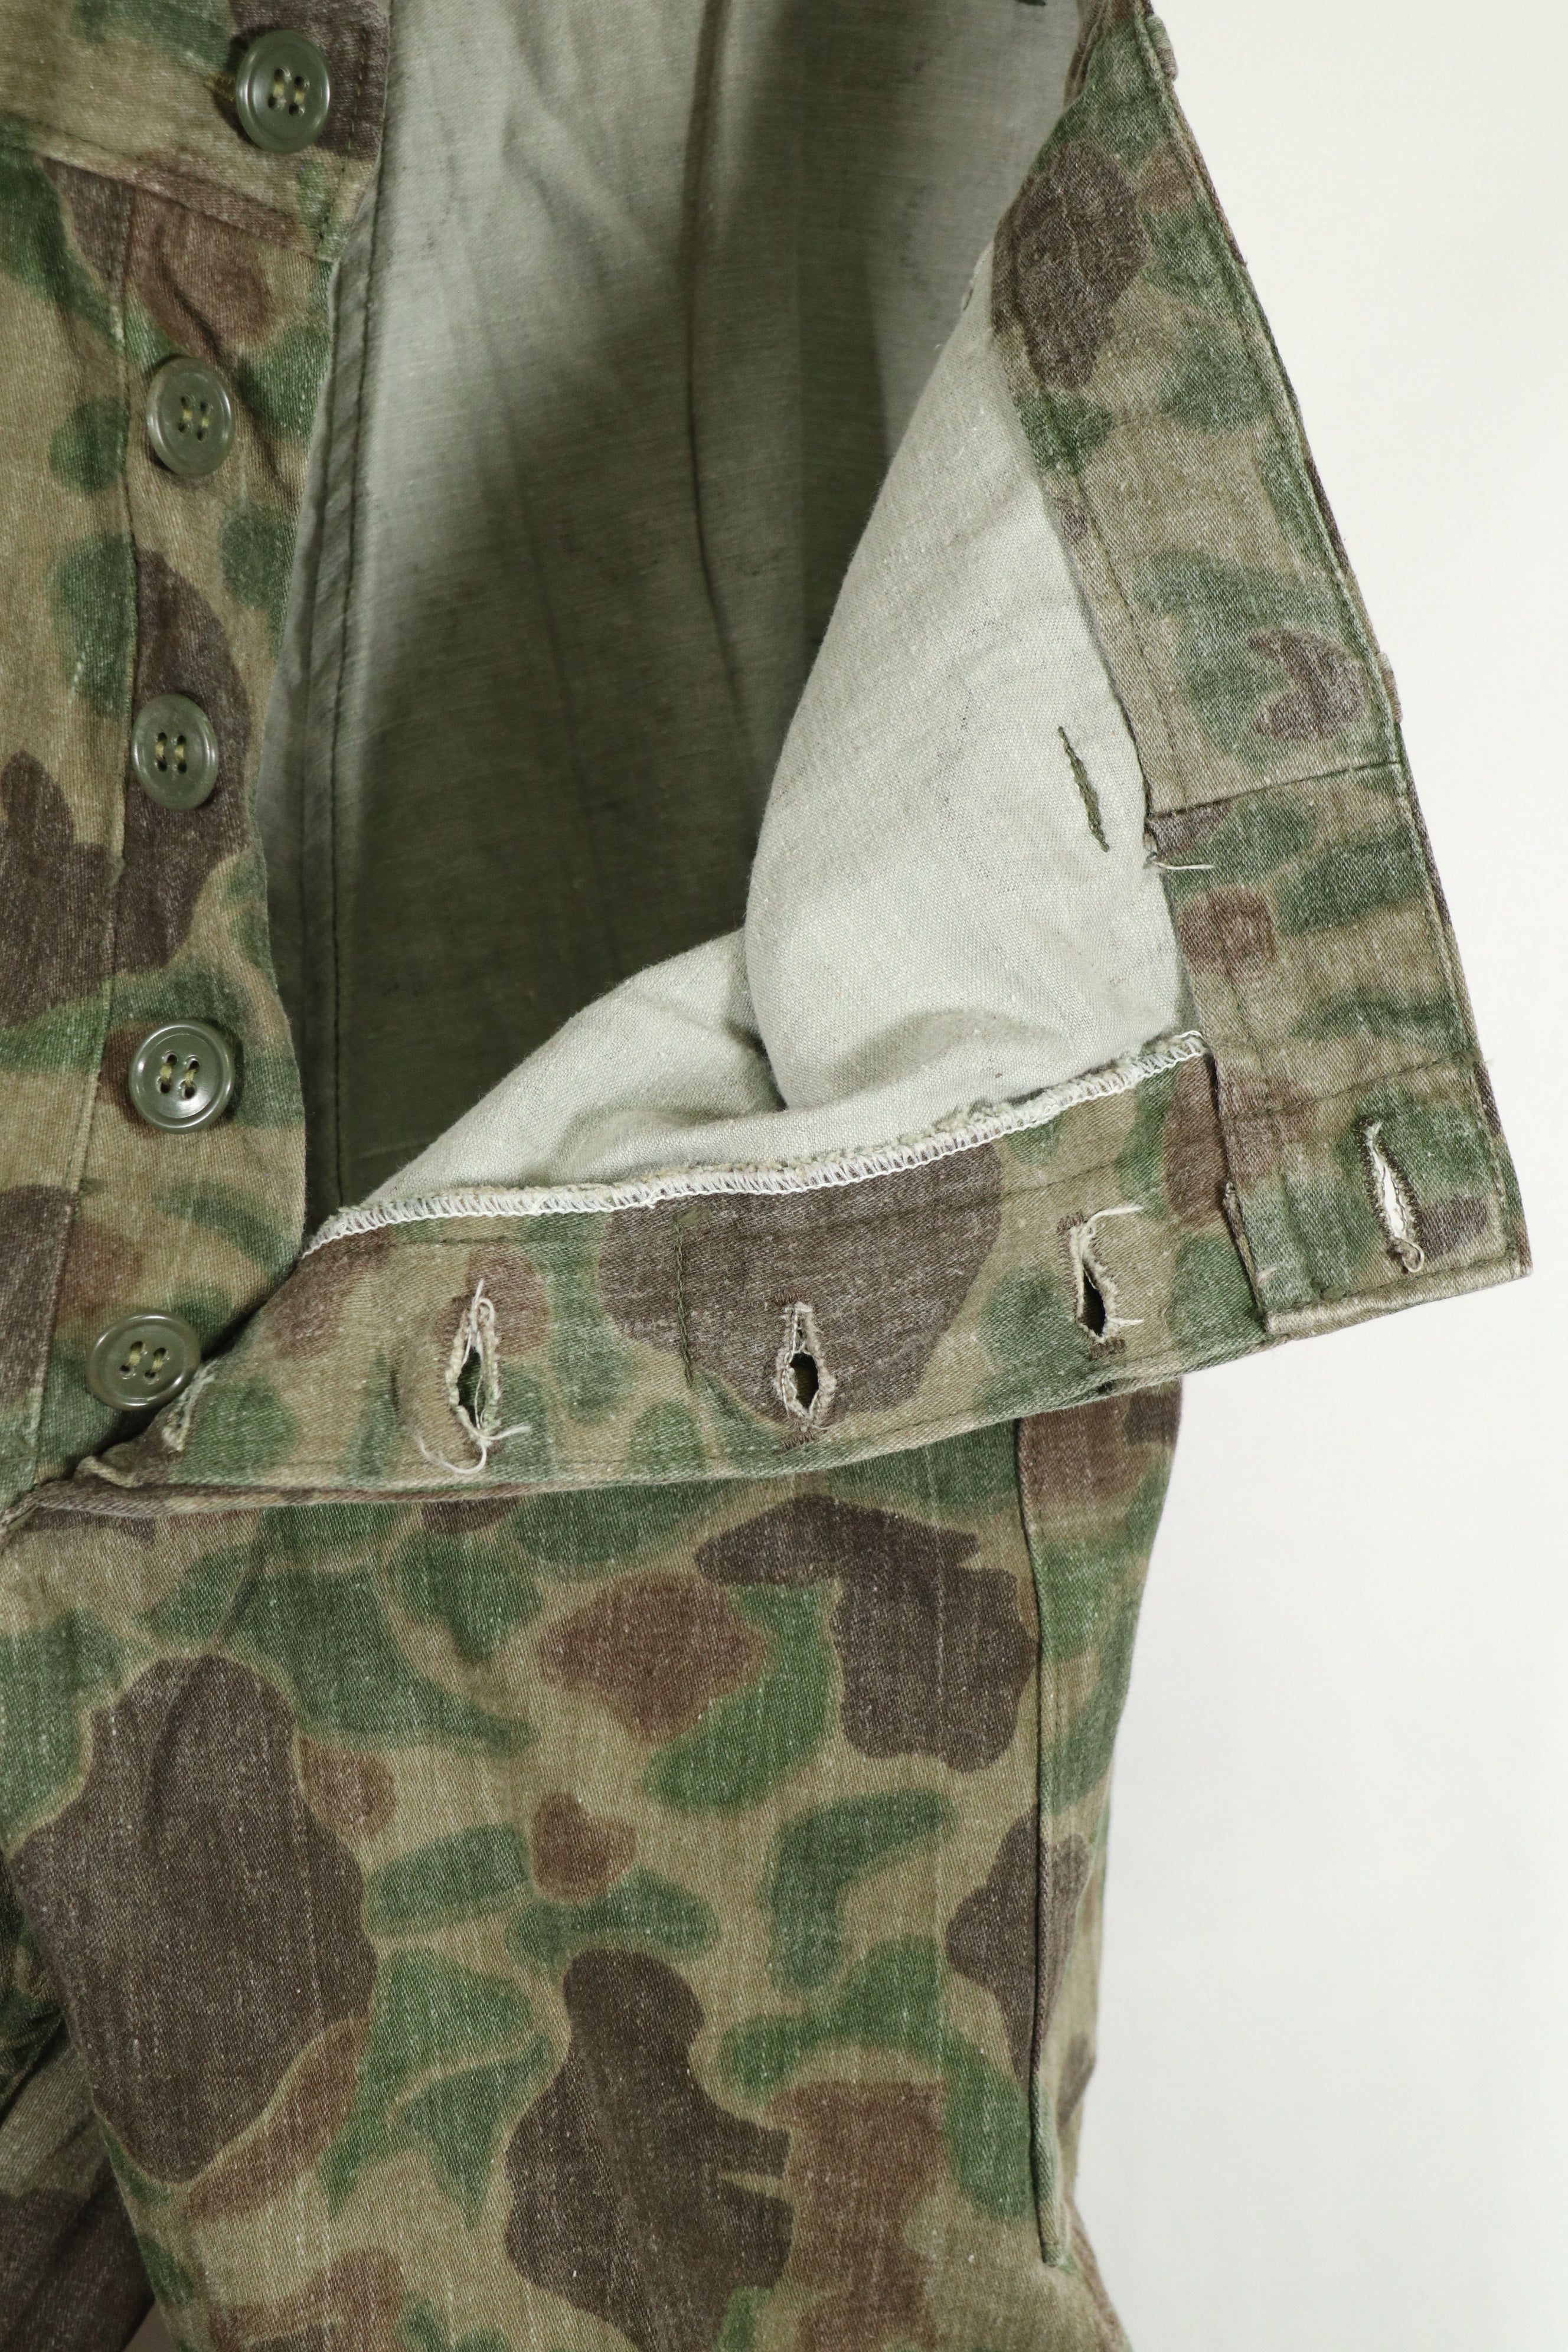 Civilian Duck Hunter Camouflage Hunting Pants Local Made Frogskin Camouflage Used